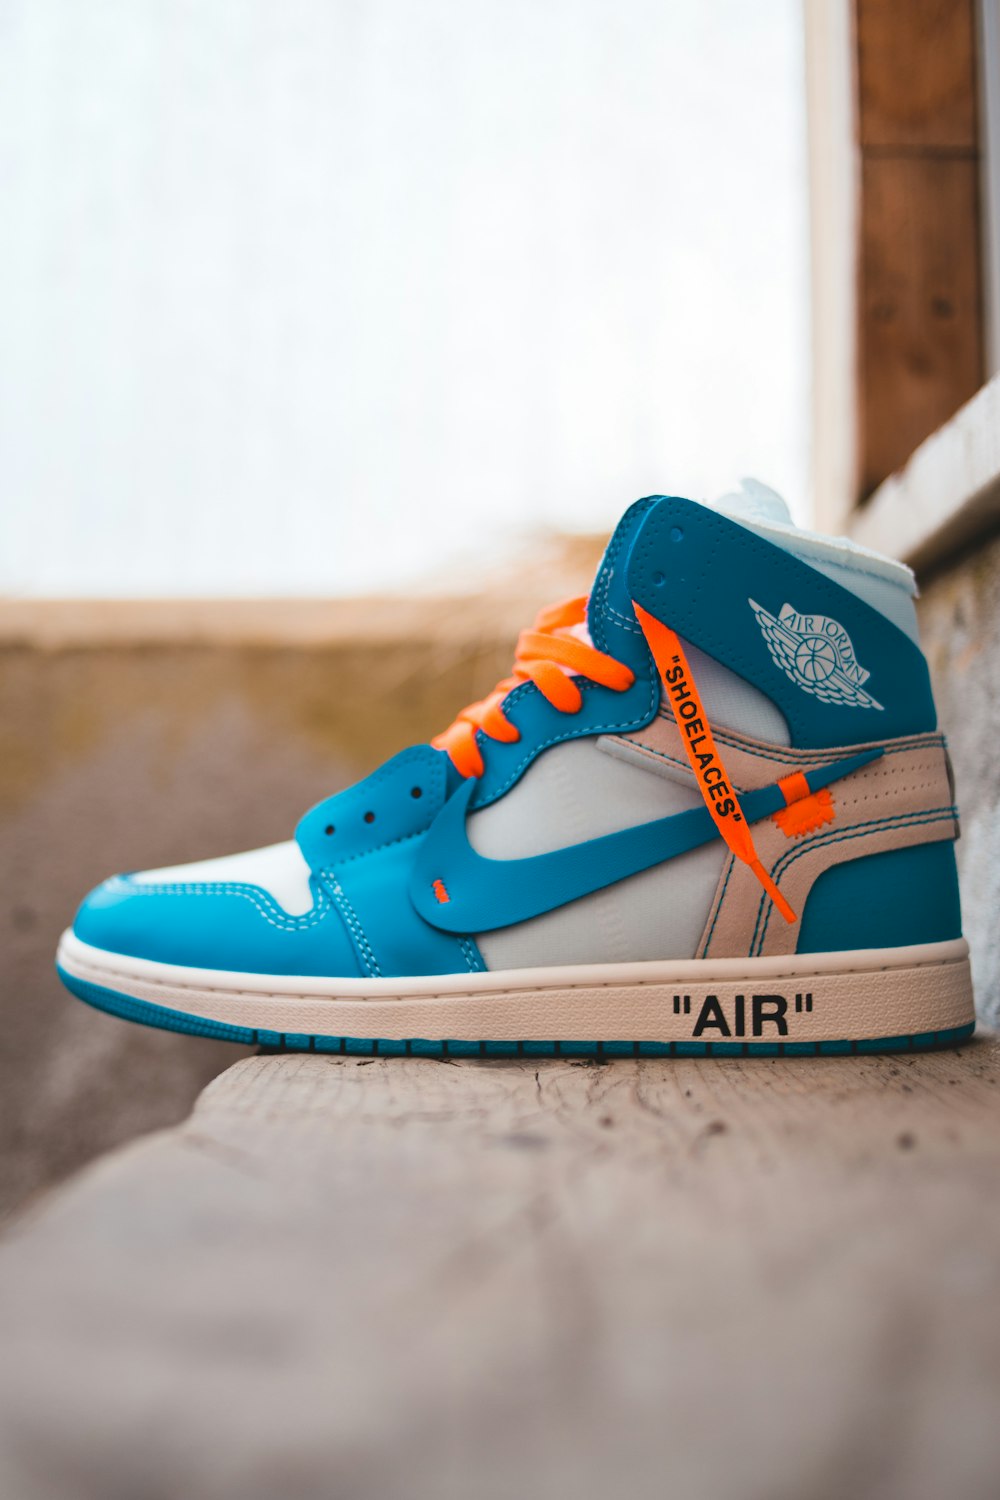 blue and orange nike high top sneakers photo – Free Image on Unsplash